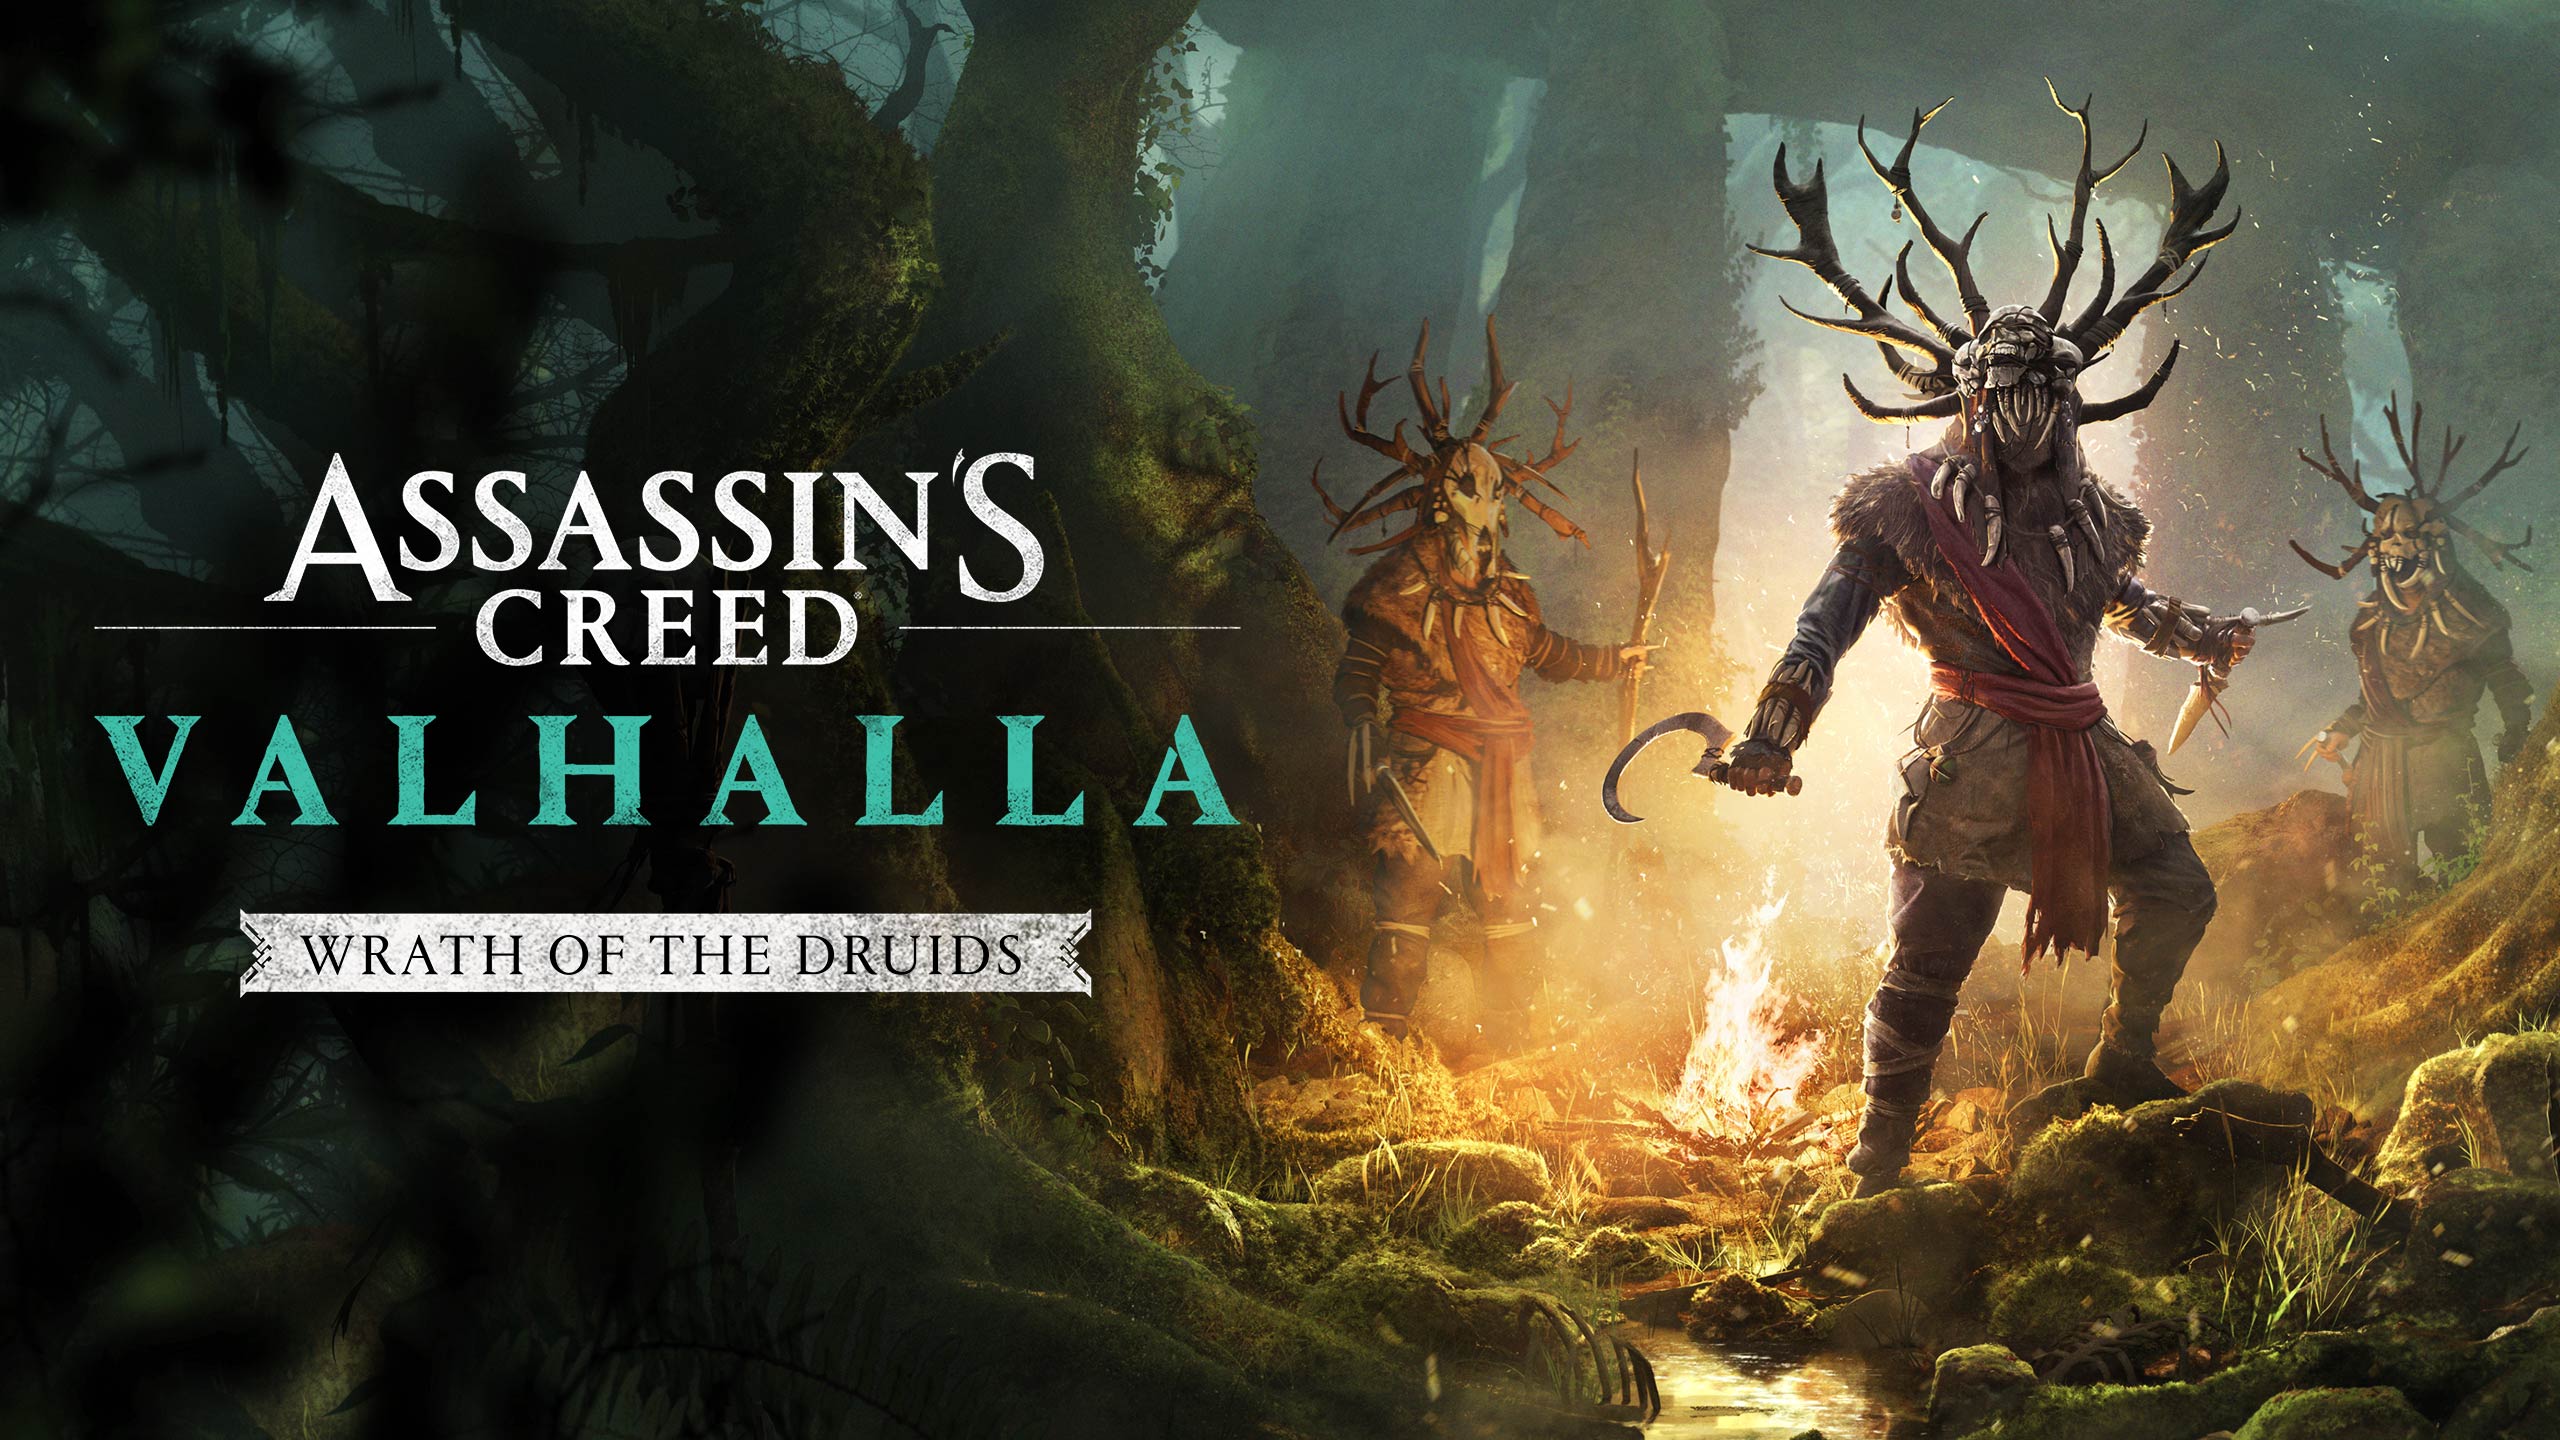 Assassin's Creed Valhalla: Wrath of the Druids soundtrack out now – Gaming  Audio News